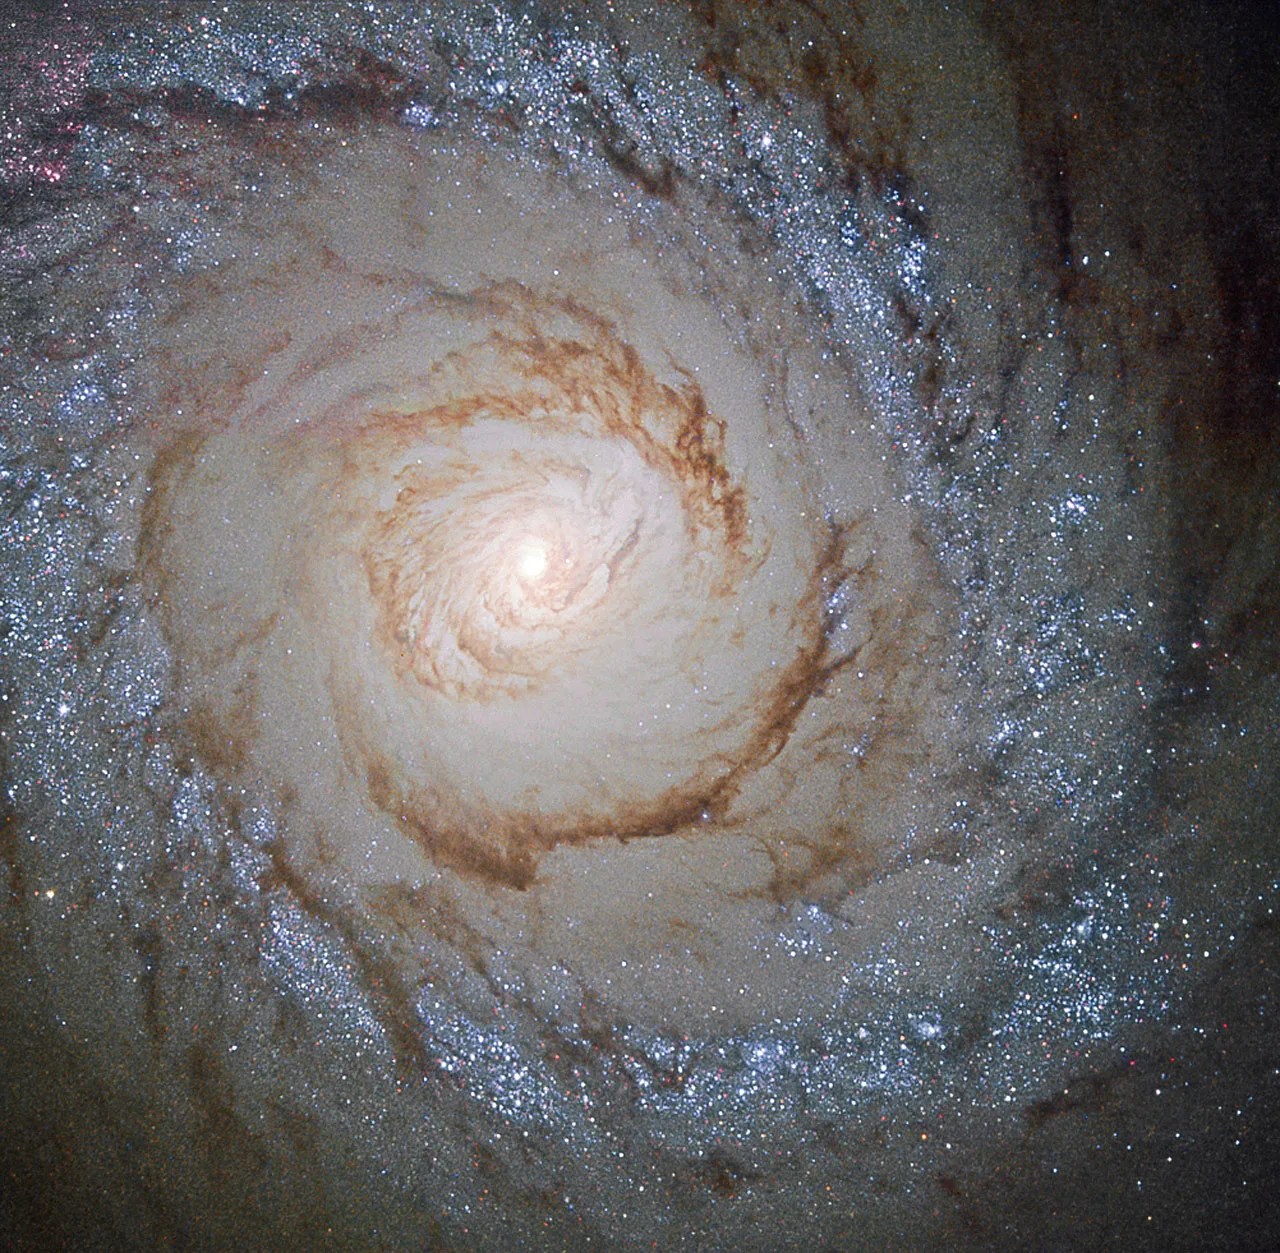 Galaxy messier 94. Its outer spirals of blue stars, with a smatter of pink, make a nearly-circle shape around the core. The inner part of the galaxy has several reddish-brown trails of gaseous arms.